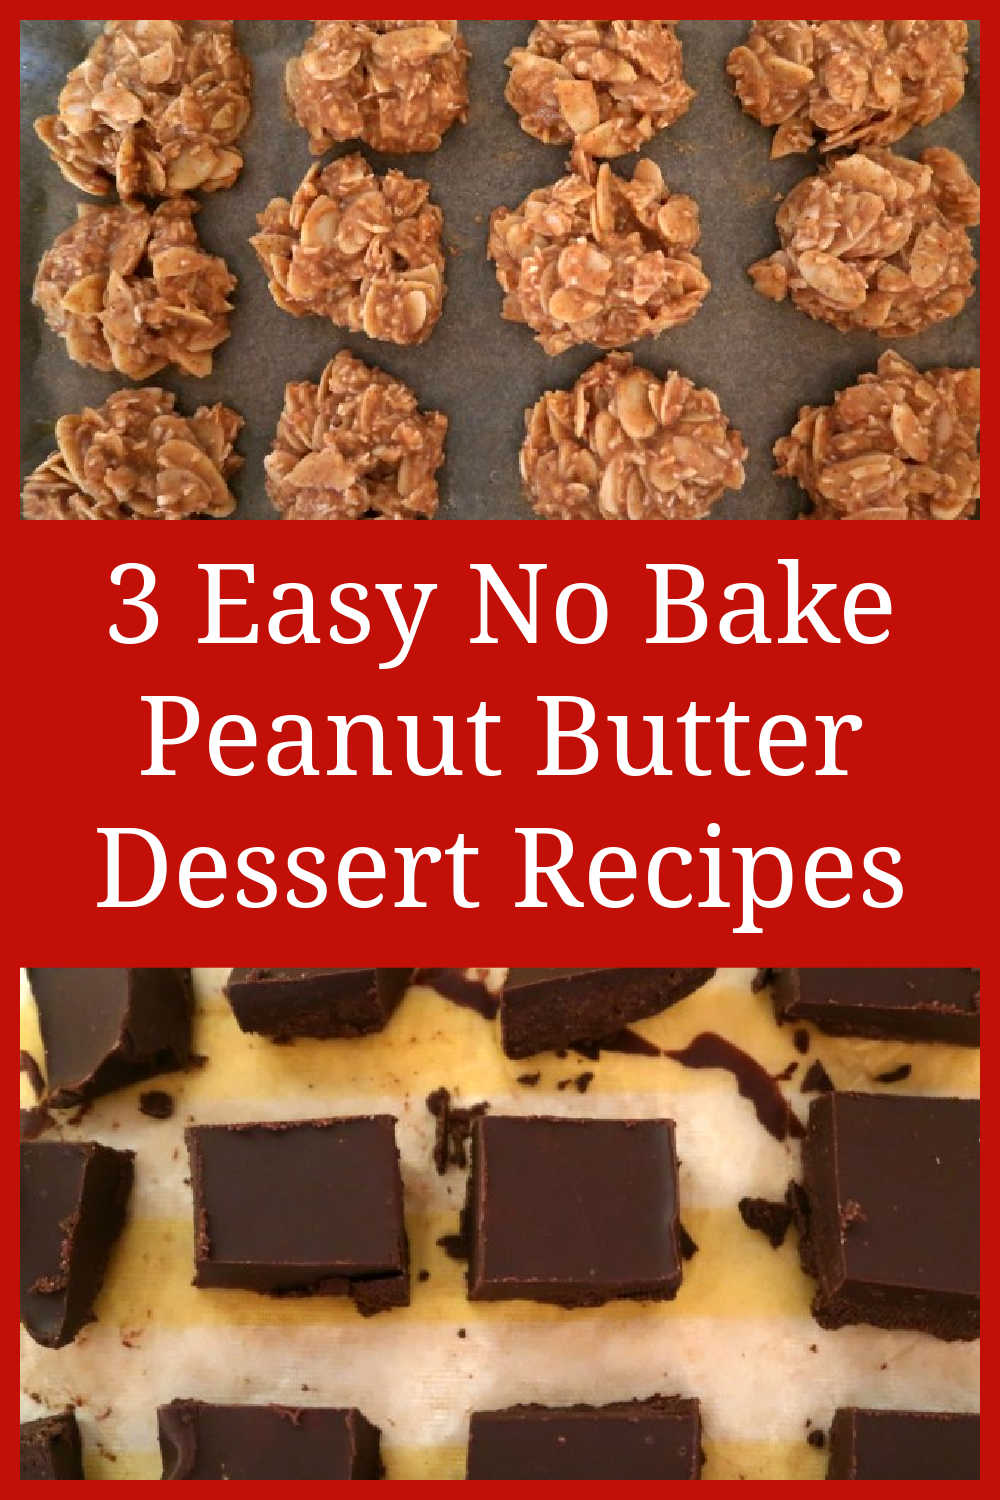 Easy Peanut Butter Desserts - The 3 best healthy low carb, keto and gluten free no bake dessert recipes, with only 3 or 5 ingredients - with the video tutorials.